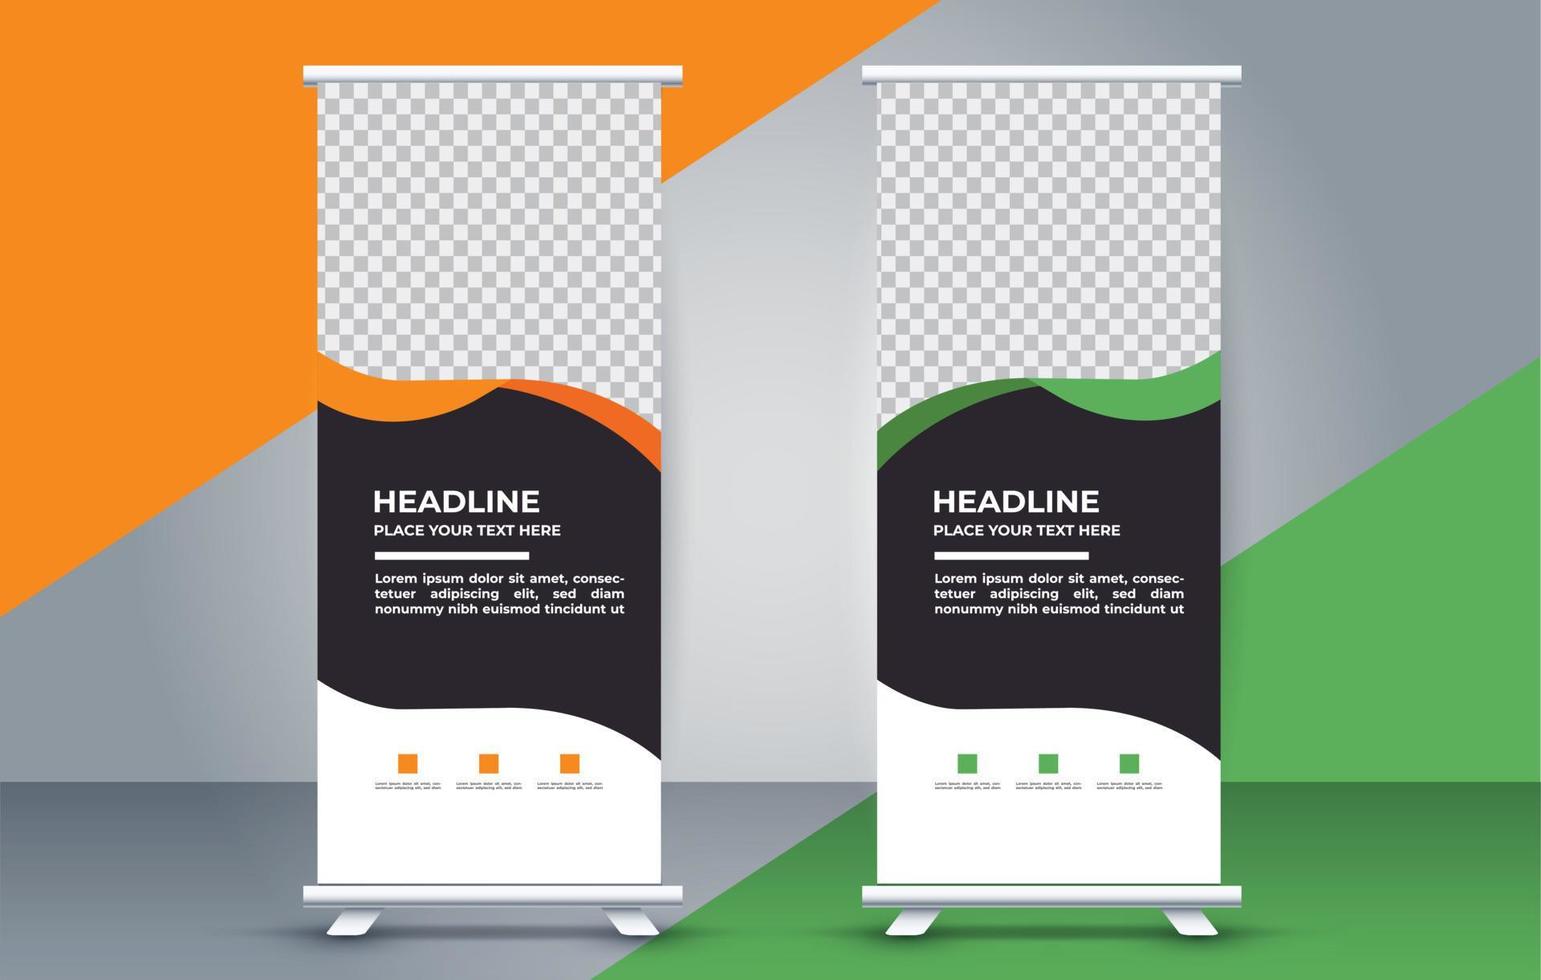 Roll up standee banner template with modern shapes vector